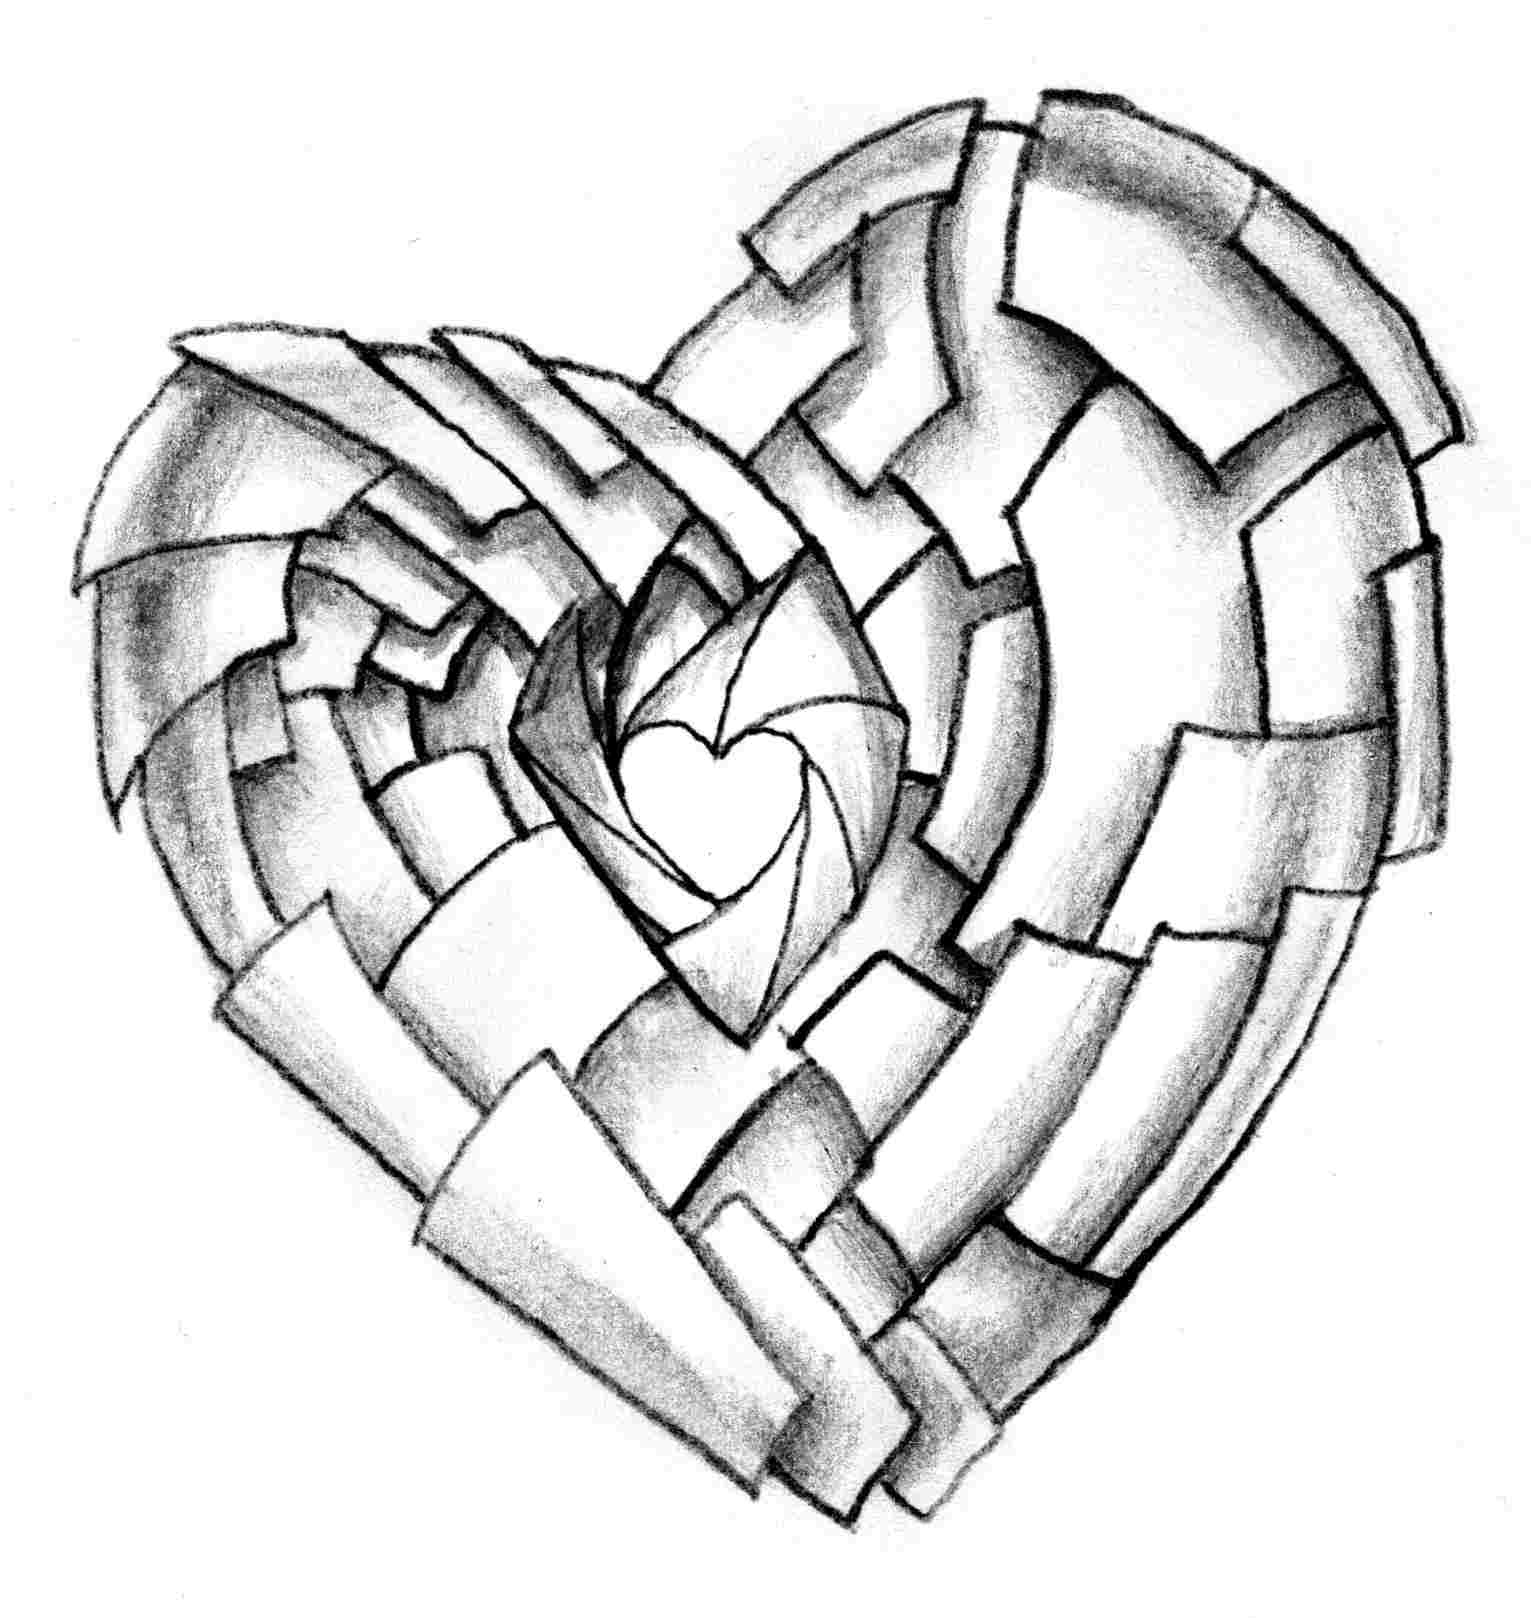 Broken Heart Drawings In Pencil | Free download on ClipArtMag